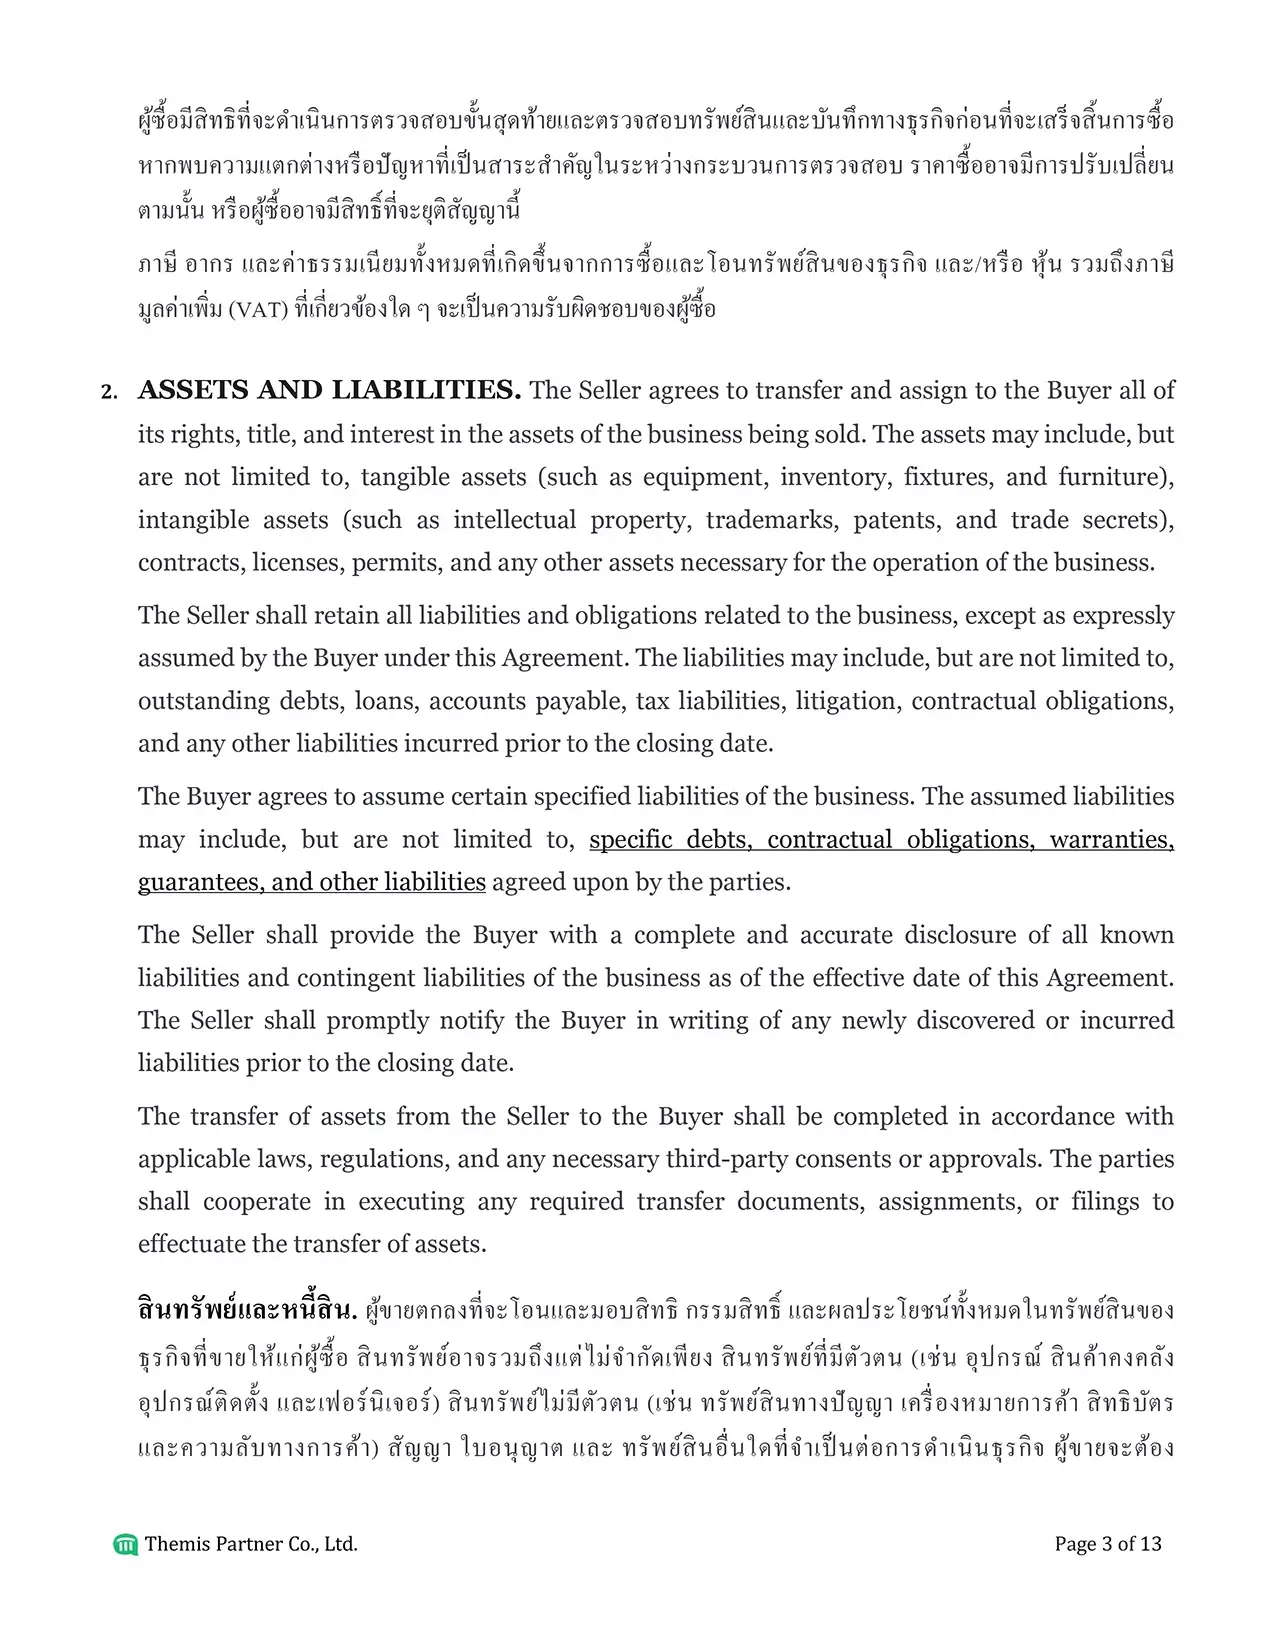 Business purchase agreement Thailand 3